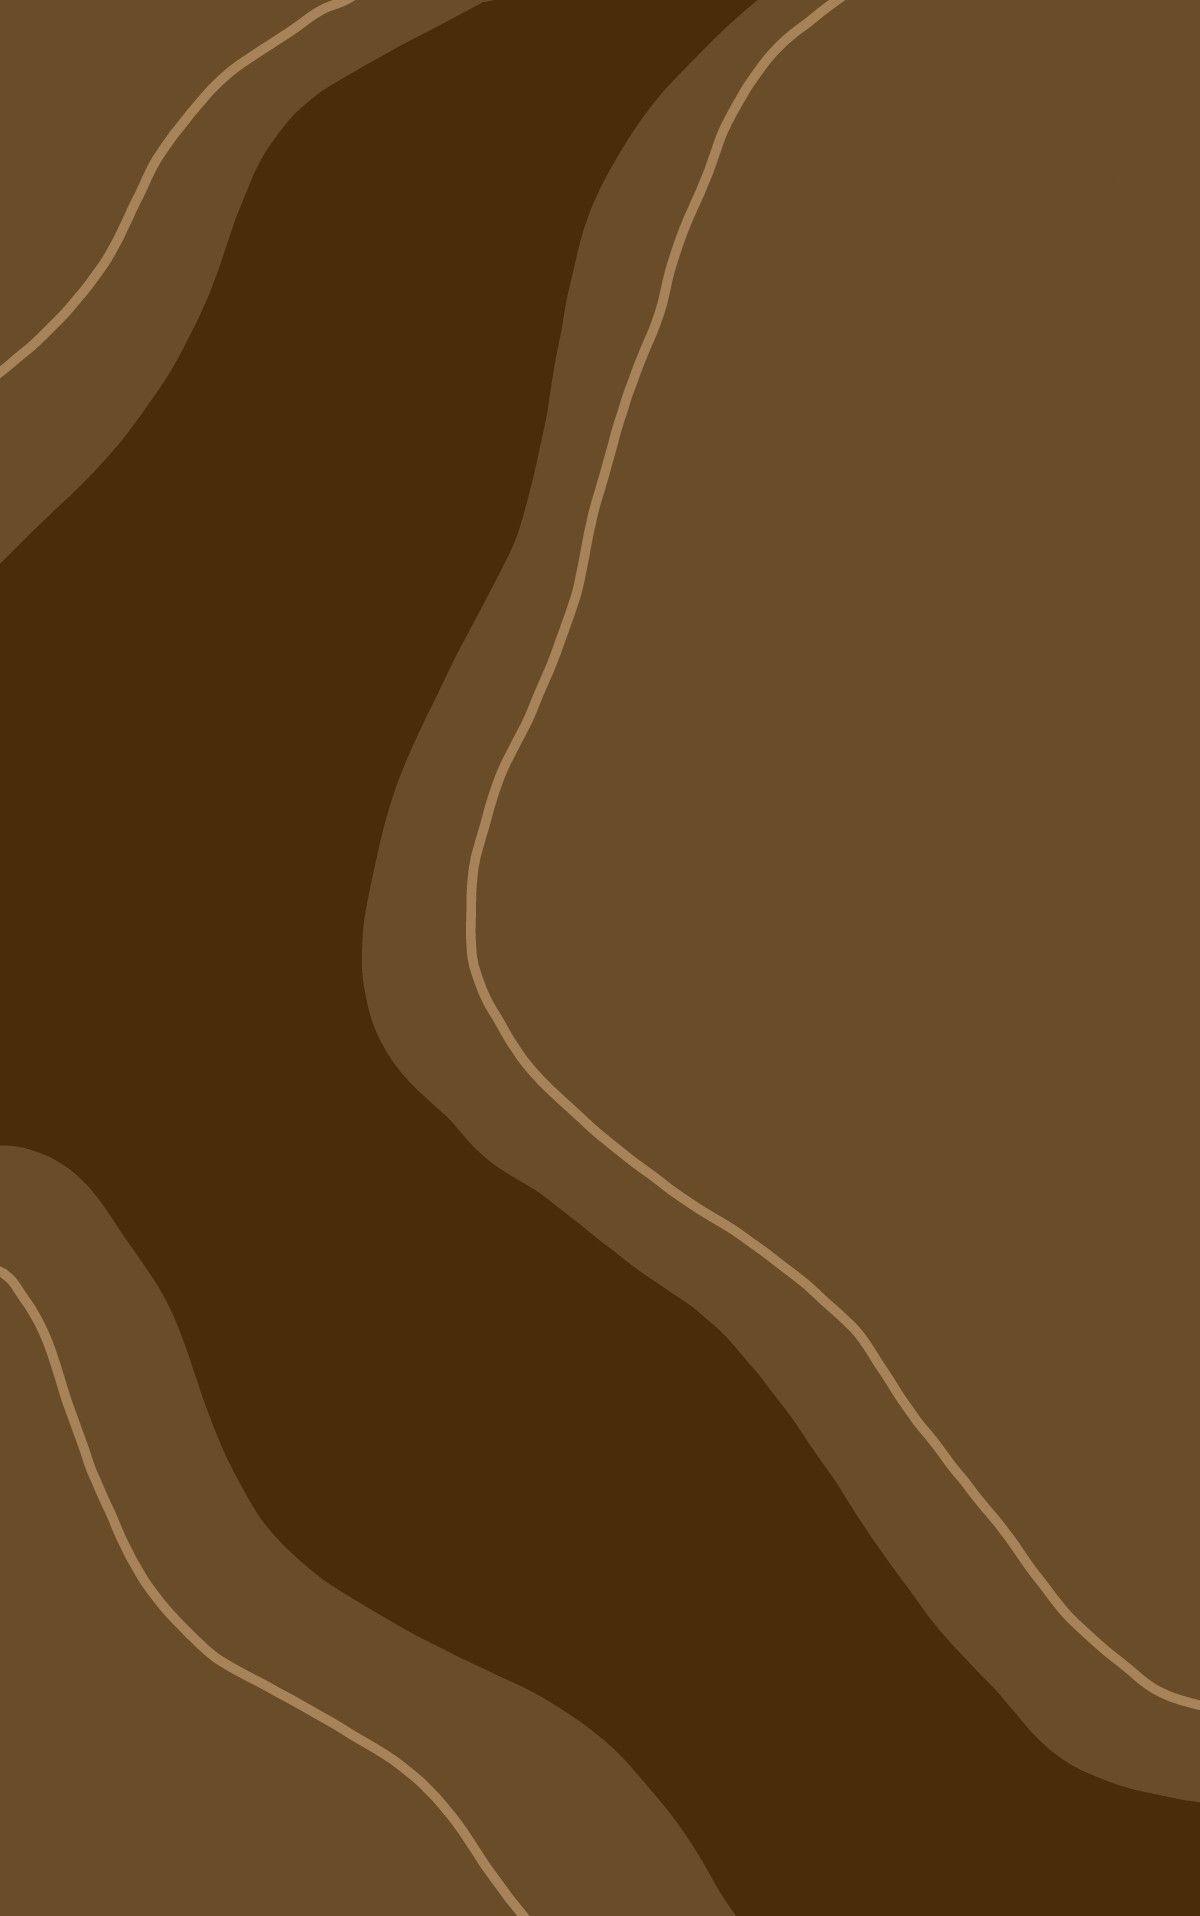 Wallpapers 20 Minimalist Brown Wallpaper iPhone Ideas for iPhone  Kaboom